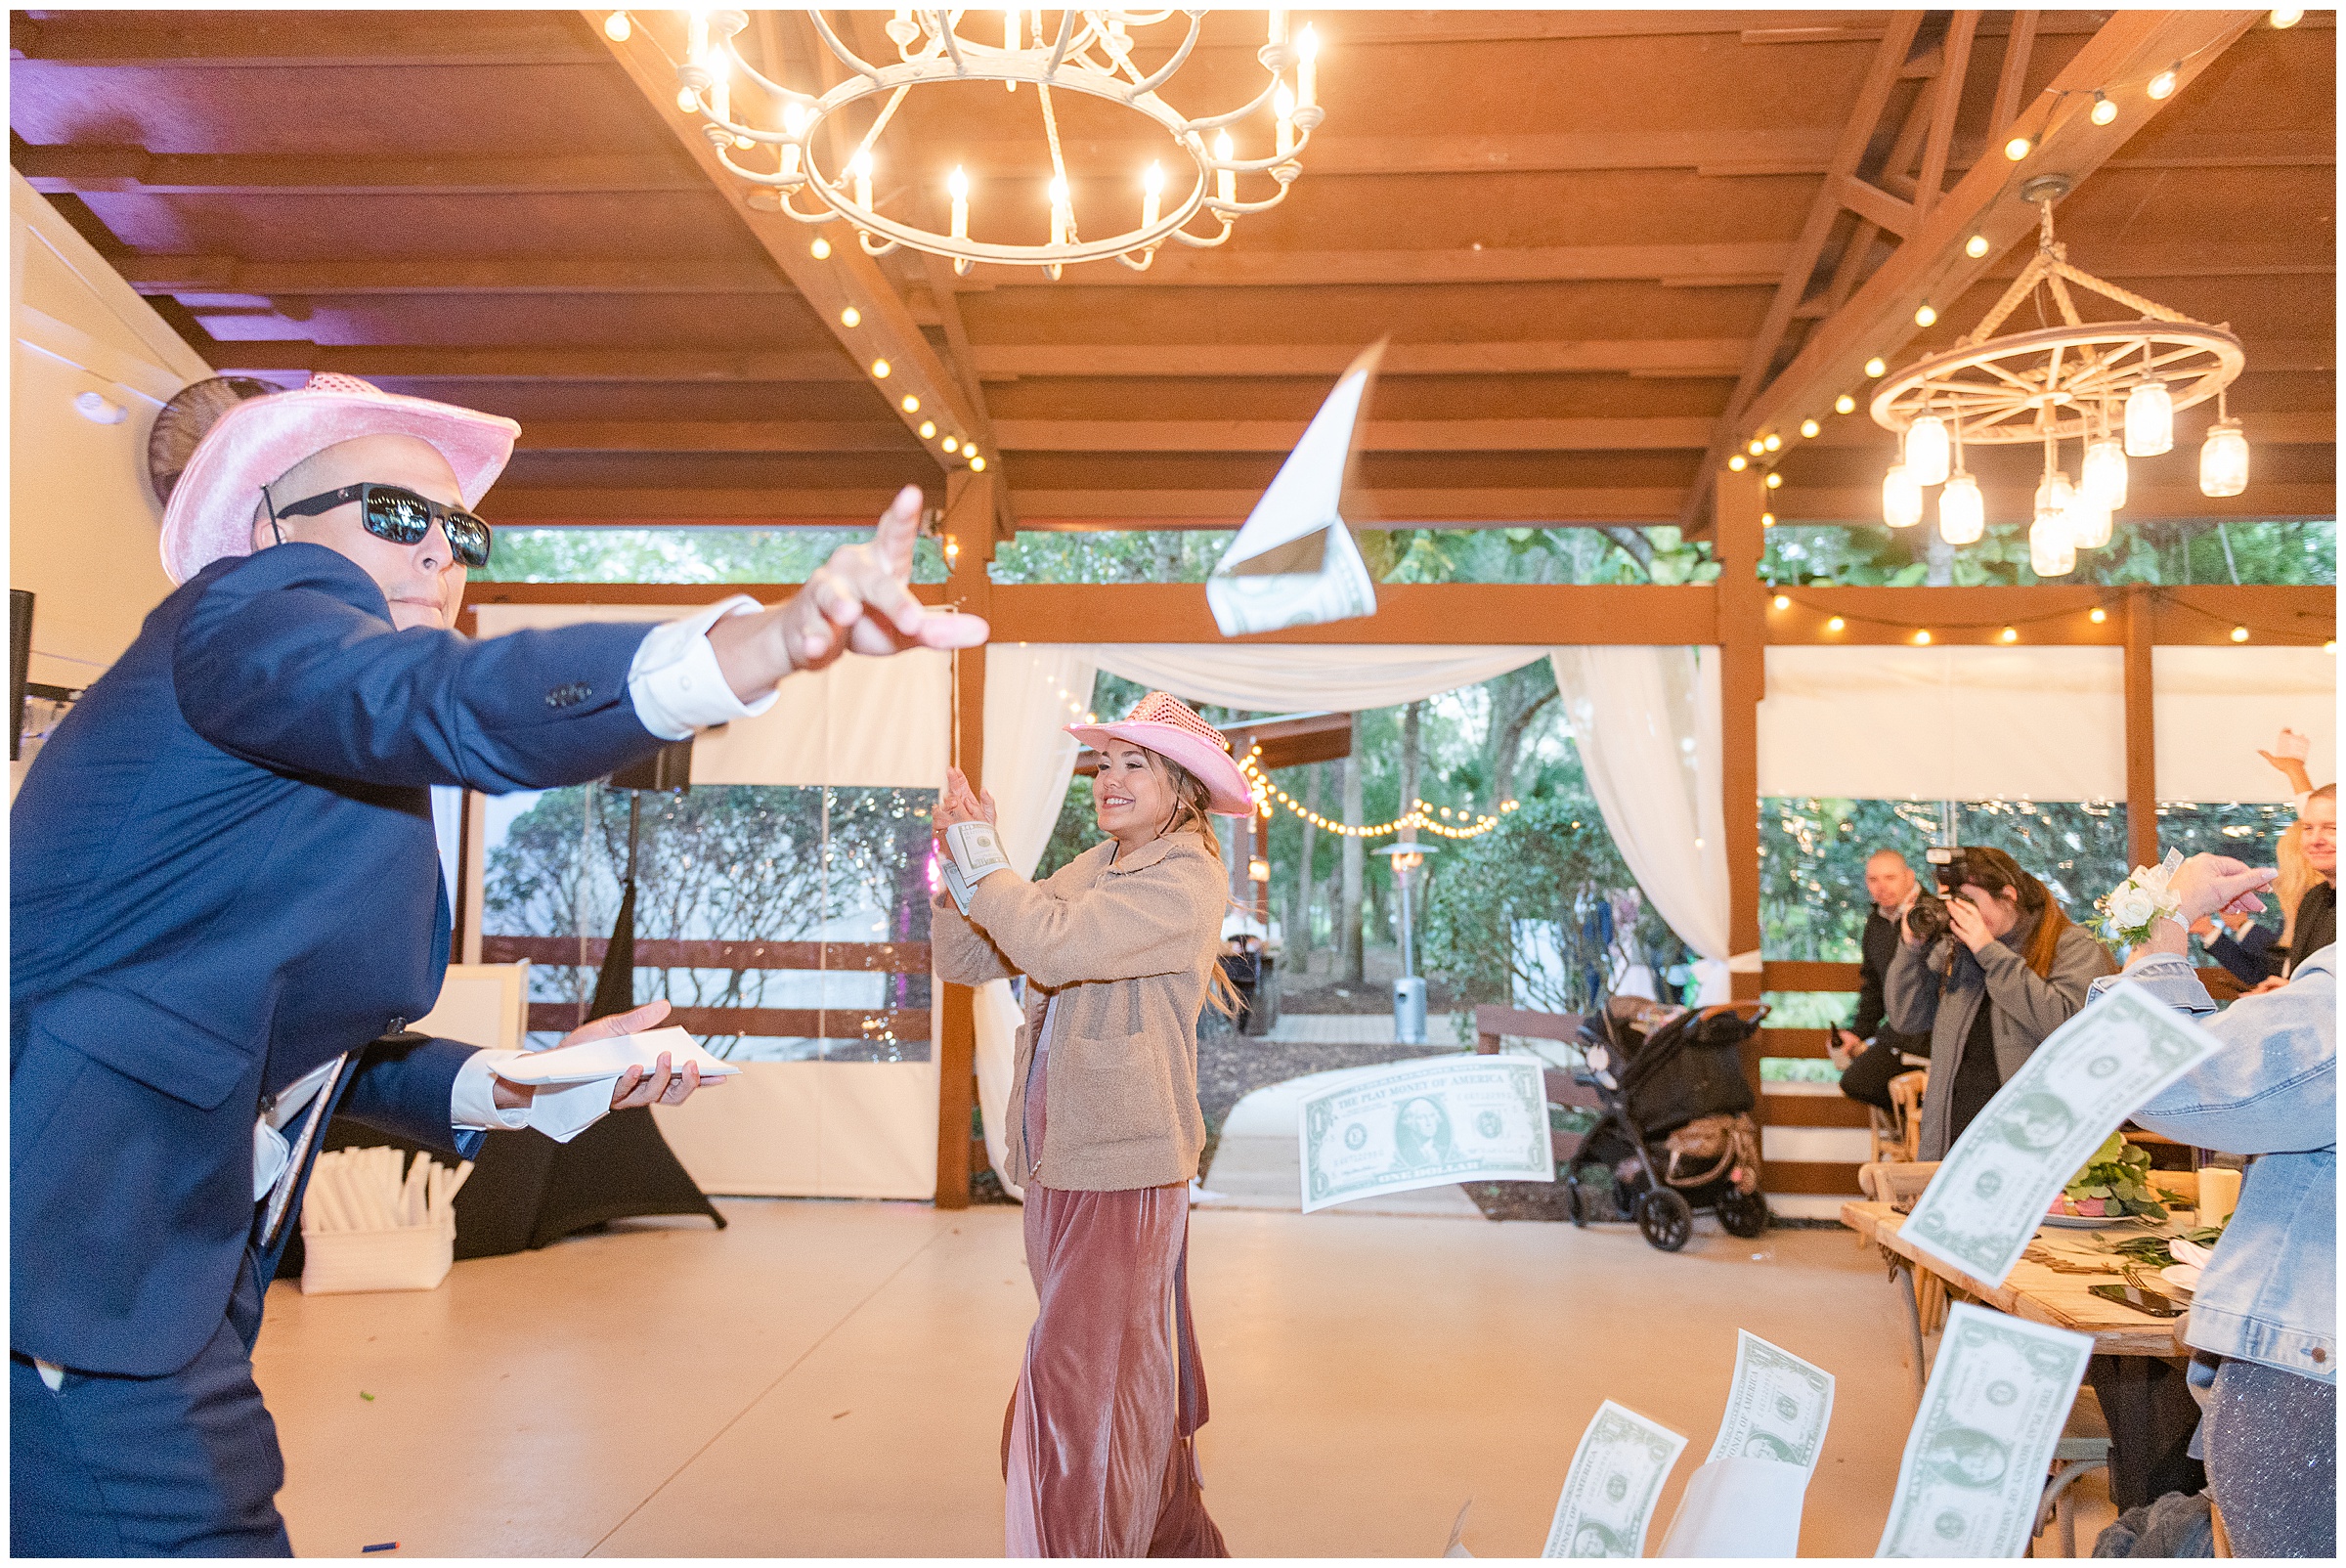 Fun bridal party reception entrance with bridemaid and groomsmen with cowboy hats and throwing fake money around